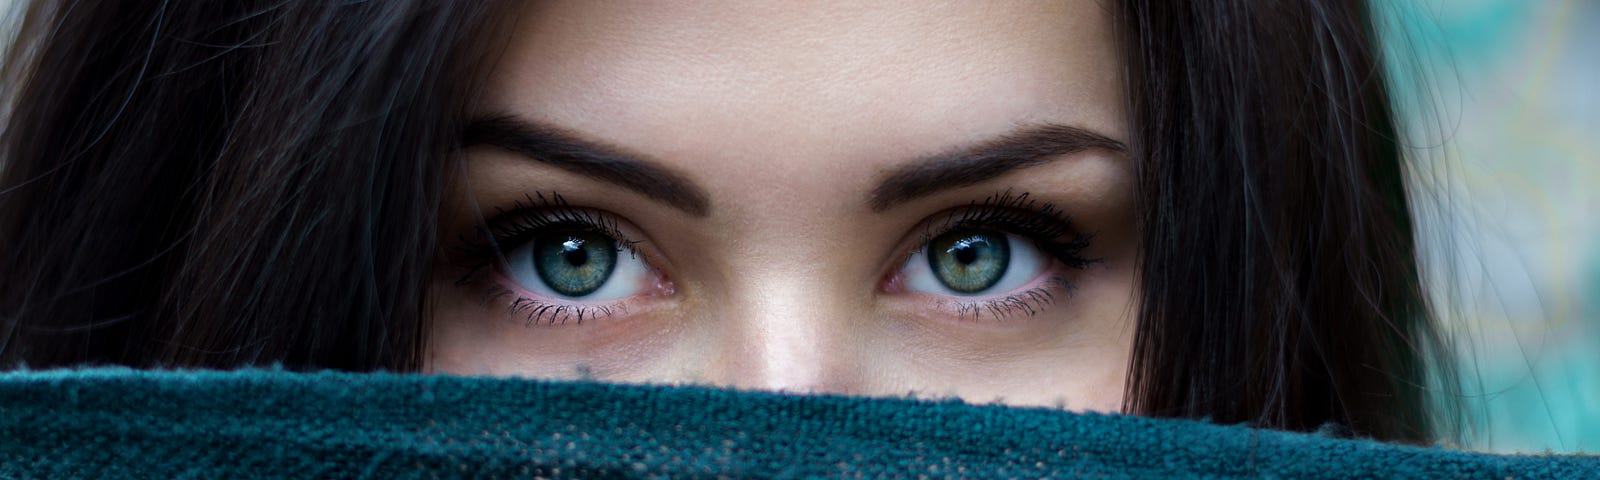 Woman with brown hair and blue eyes hiding her lower face behing a dark scarf.